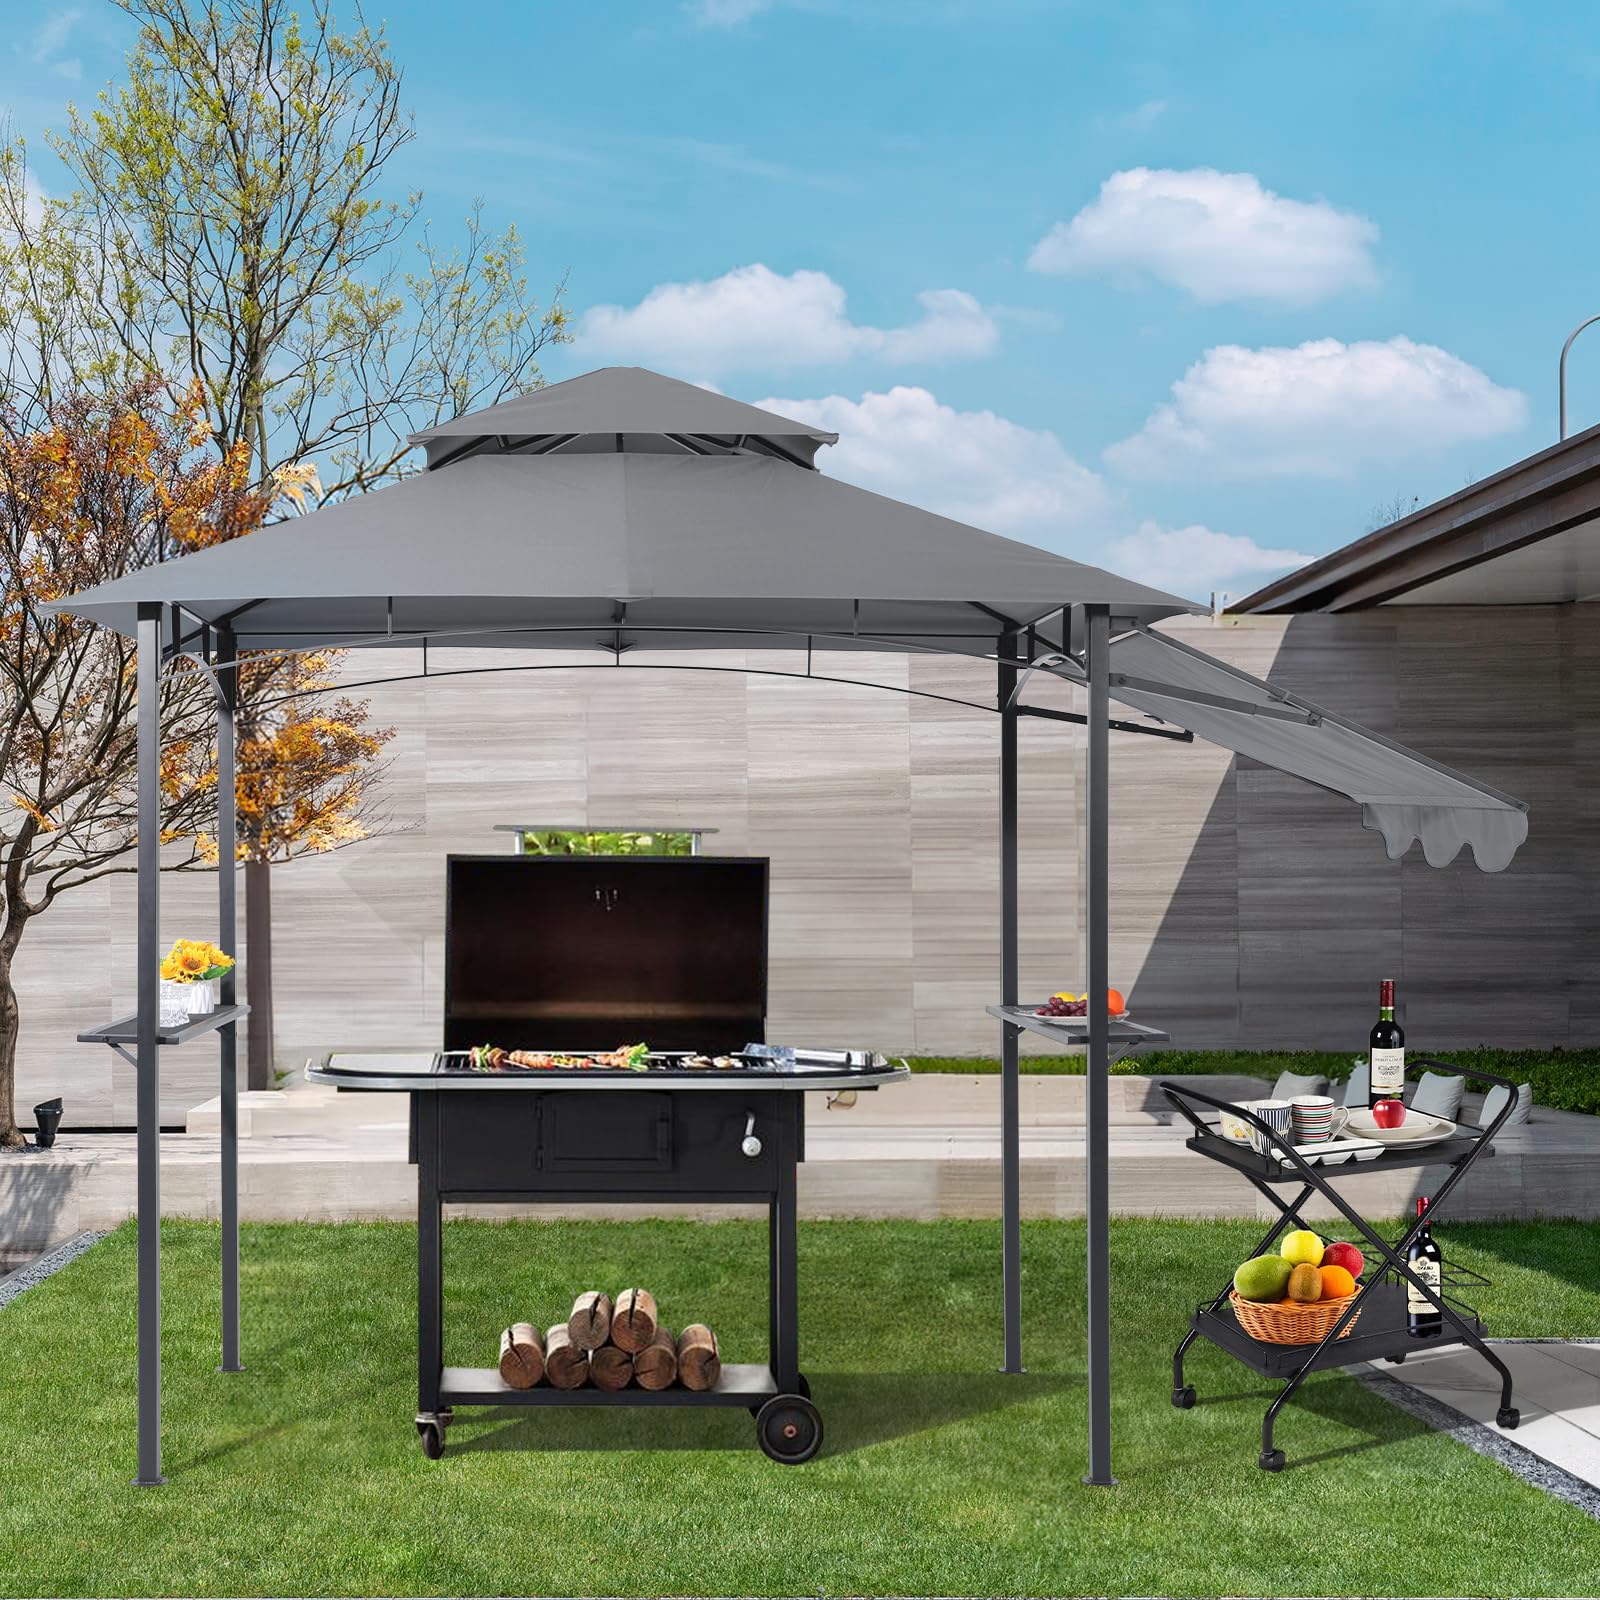 8' by 5' Metal Grill Gazebo with Side Awning, Double Tiered Soft Canopy Top, 4 Colors